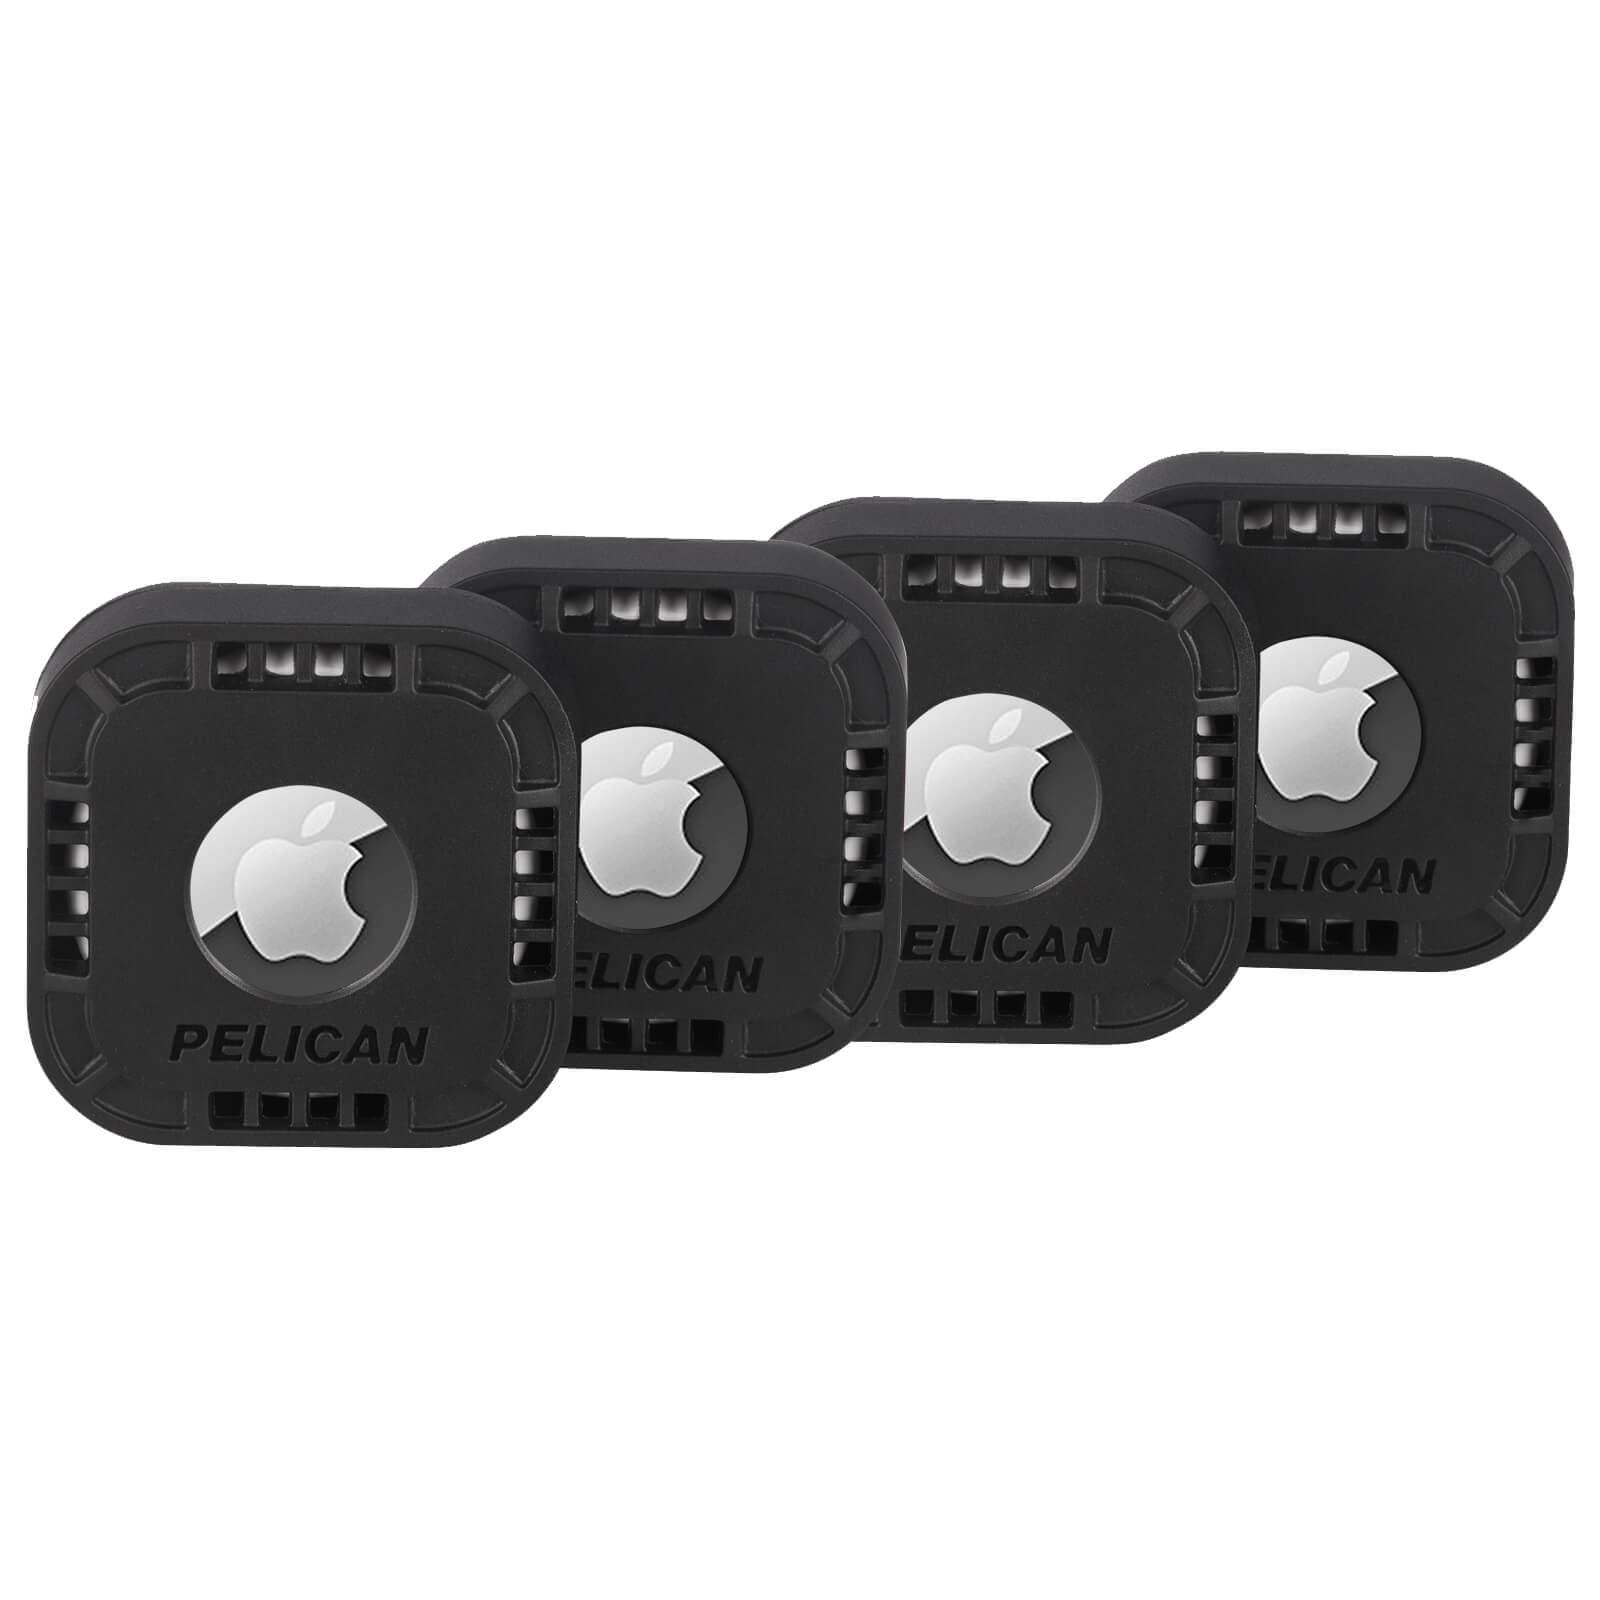 Pelican Protector Sticker Mount Case for AirTag Devices (4 Pack) -  Black/Orange/Hi Vis Yellow/Grey